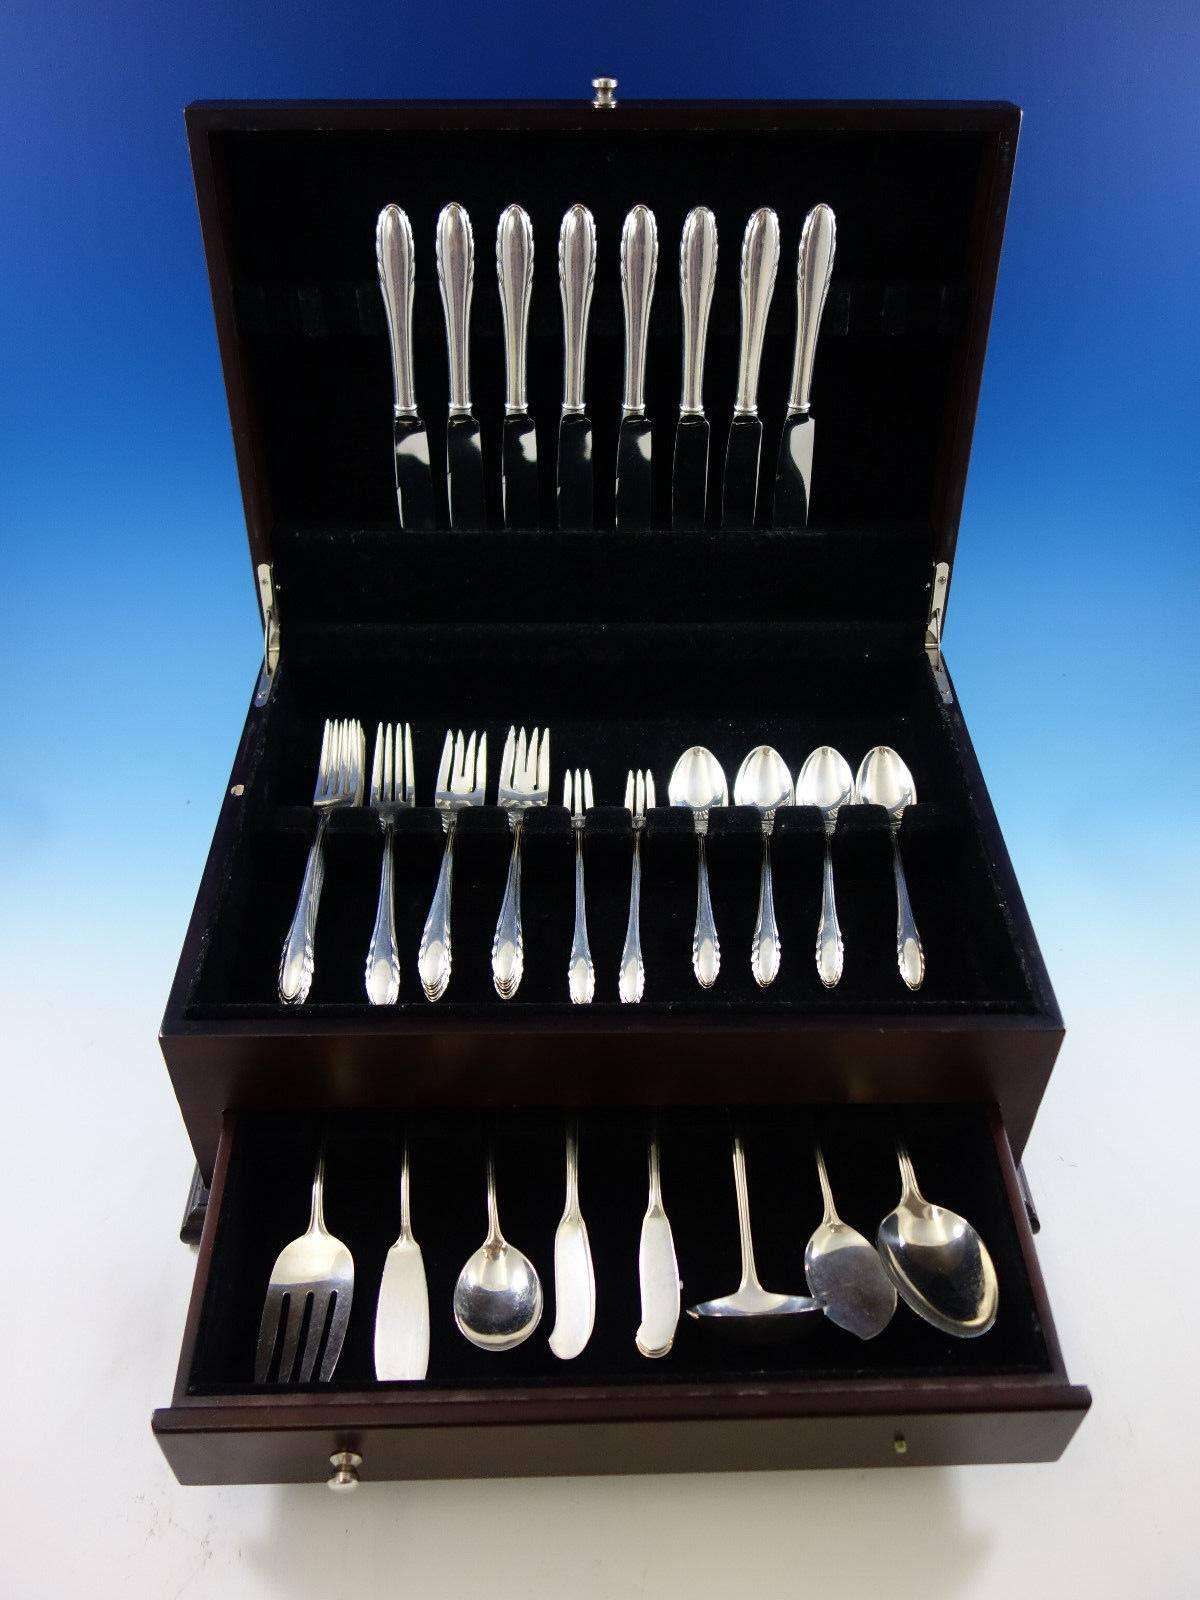 Lyric by Gorham Sterling Silver Flatware set - 54 pieces. This set includes:

8 Knives, 8 7/8